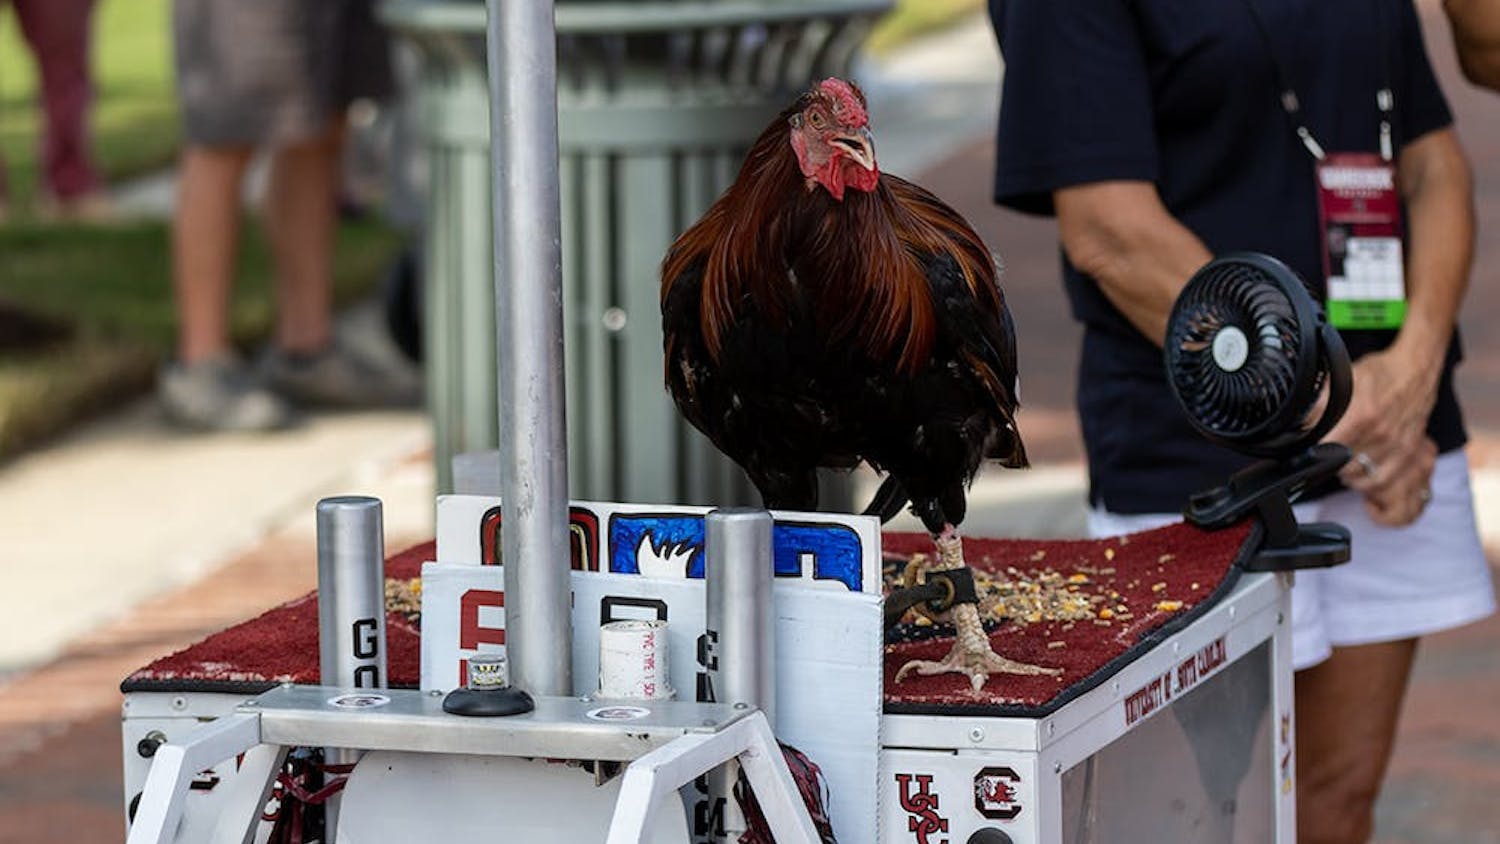 USC's live mascot perches on his robotic tank during the Gamecock Walk on Nov. 6, 2021, in Columbia, S.C. The mascot is now called The General, the university announced on Aug. 29, 2022.